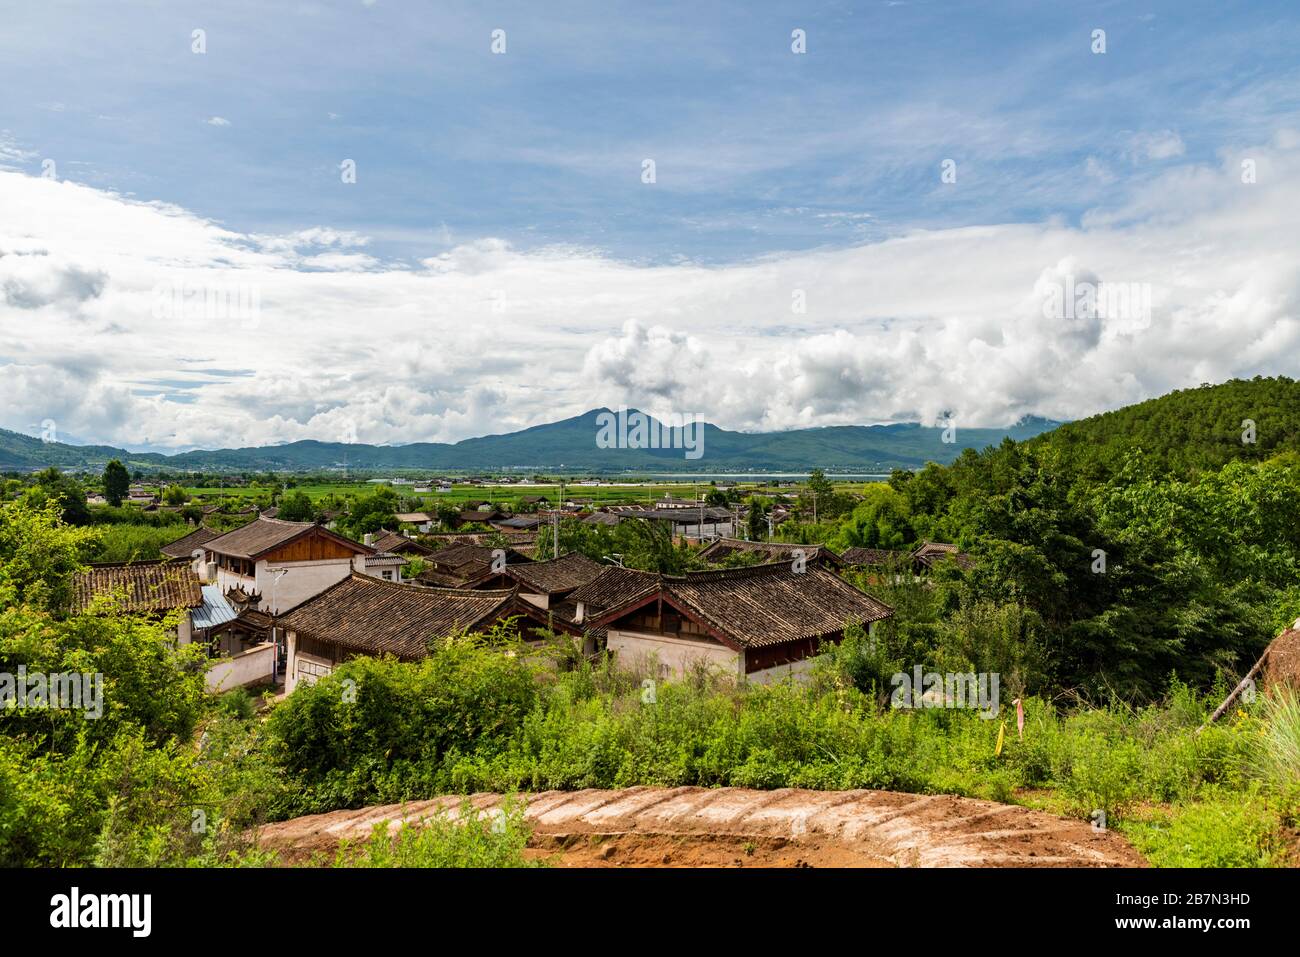 View of a Naxi people village by the Lashi Lake, from a seection of the ancient tea horse road, chamagudao, in Yunnan, China. Stock Photo